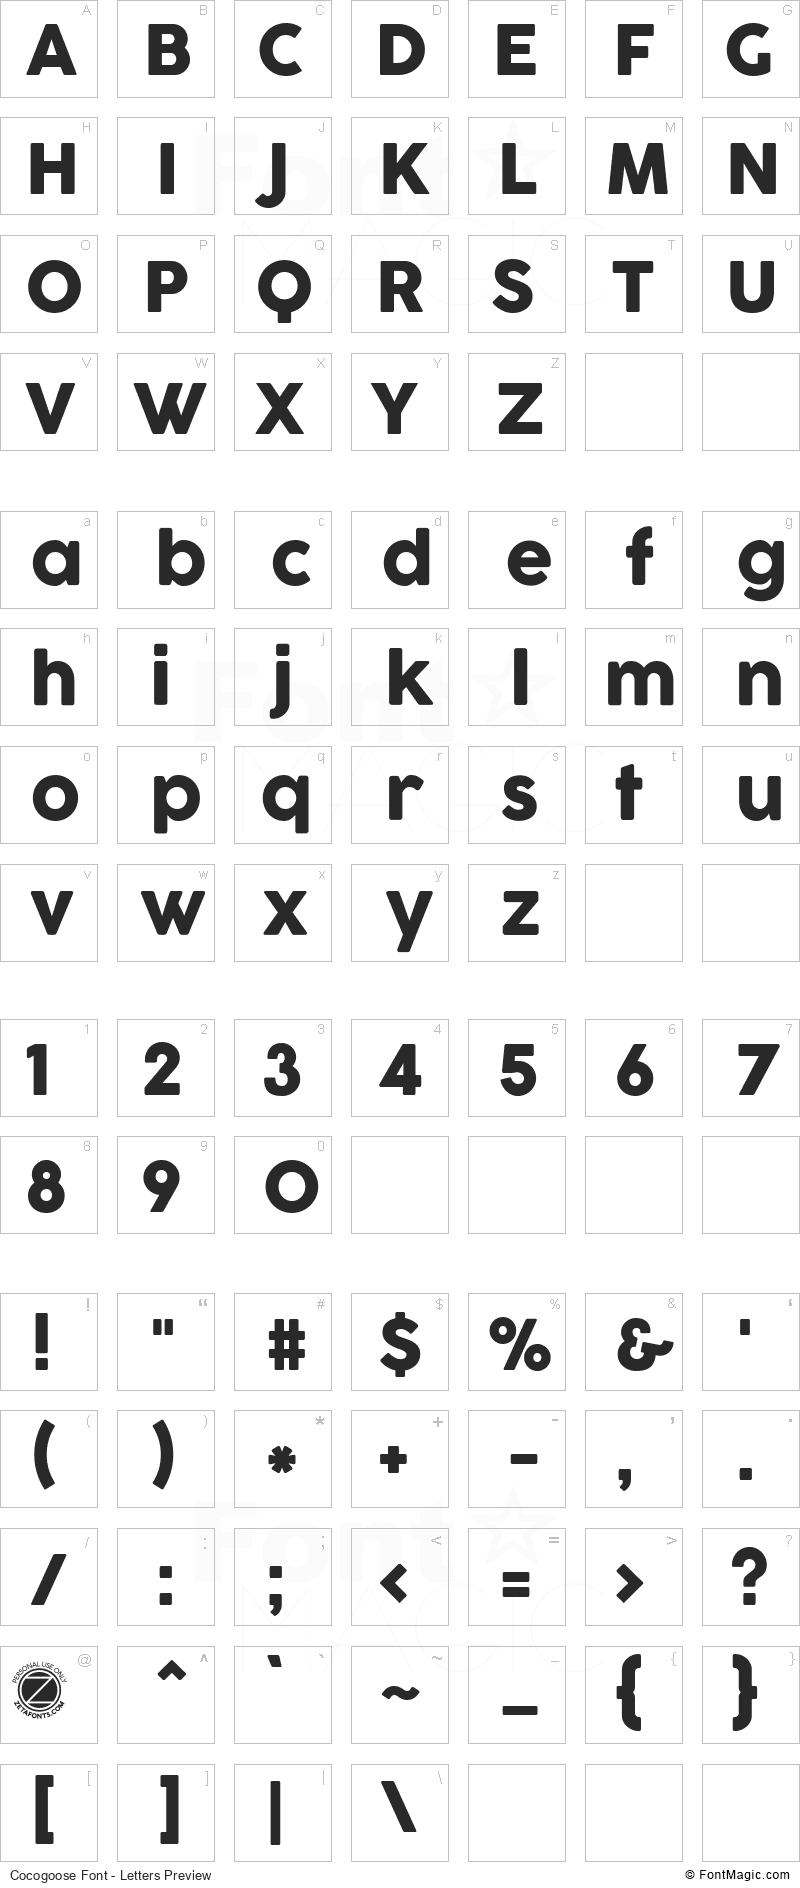 Cocogoose Font - All Latters Preview Chart